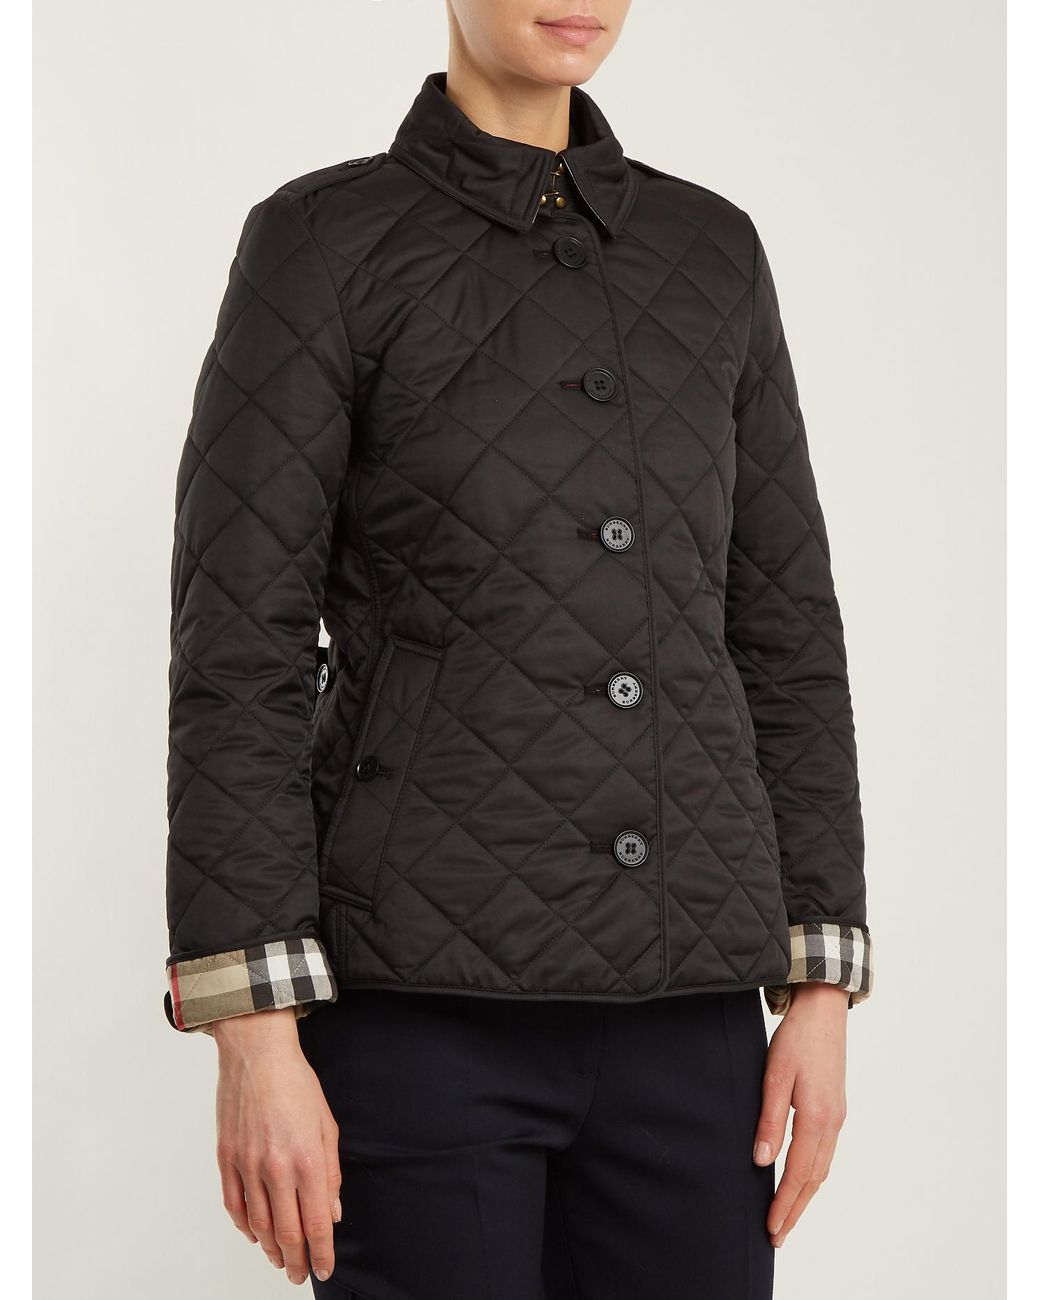 Burberry Frankby Quilted Jacket Xxl | vlr.eng.br